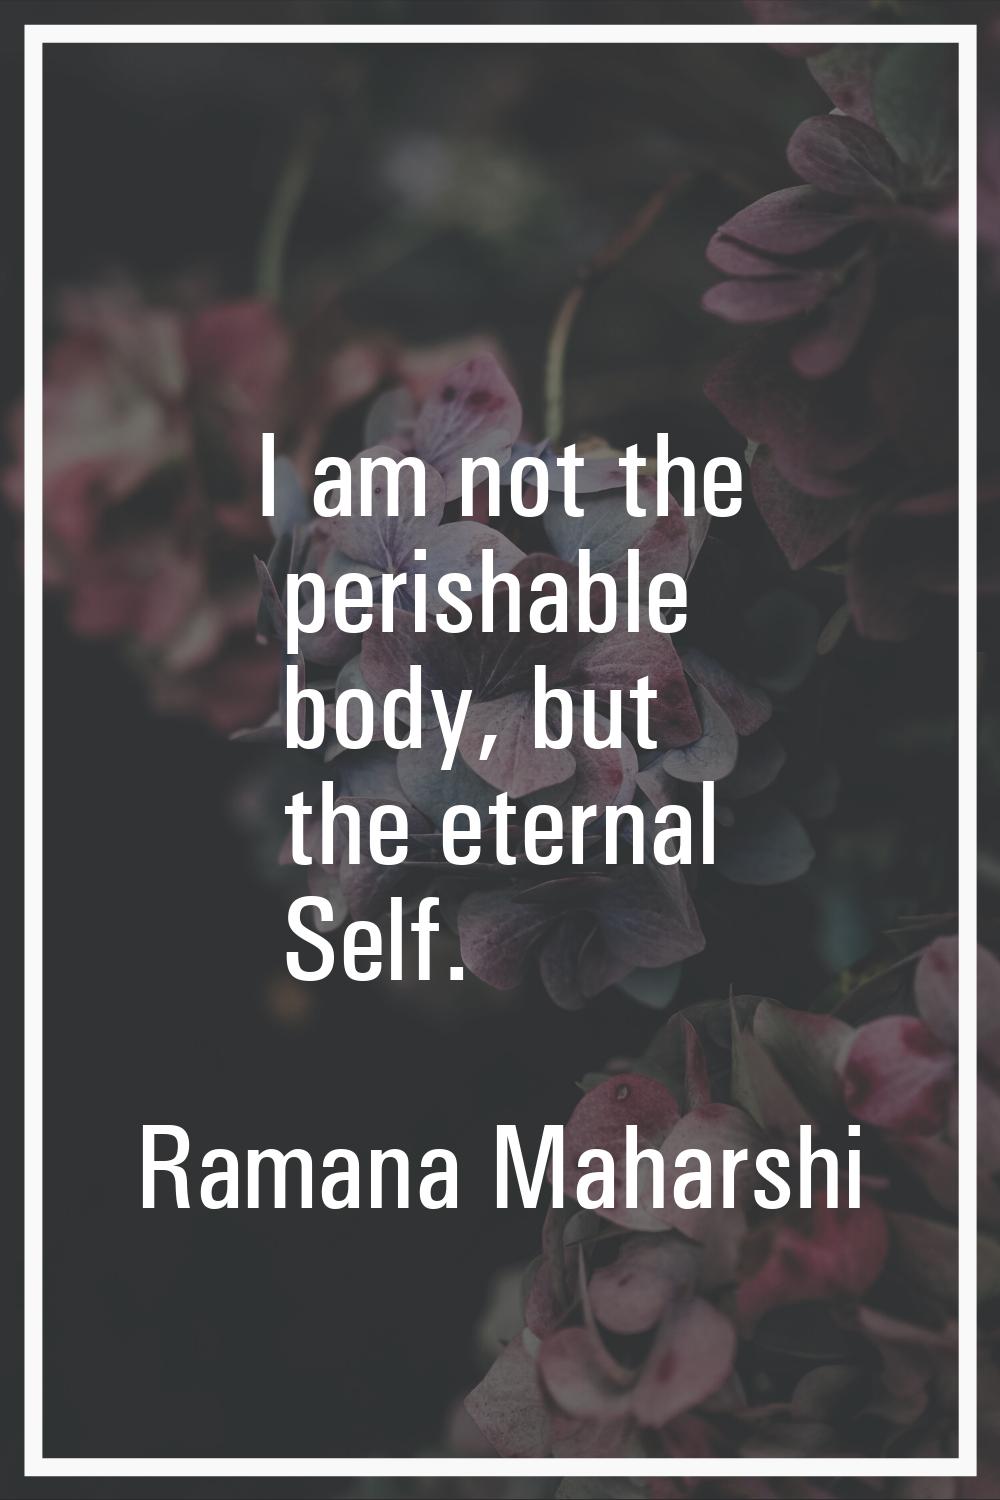 I am not the perishable body, but the eternal Self.